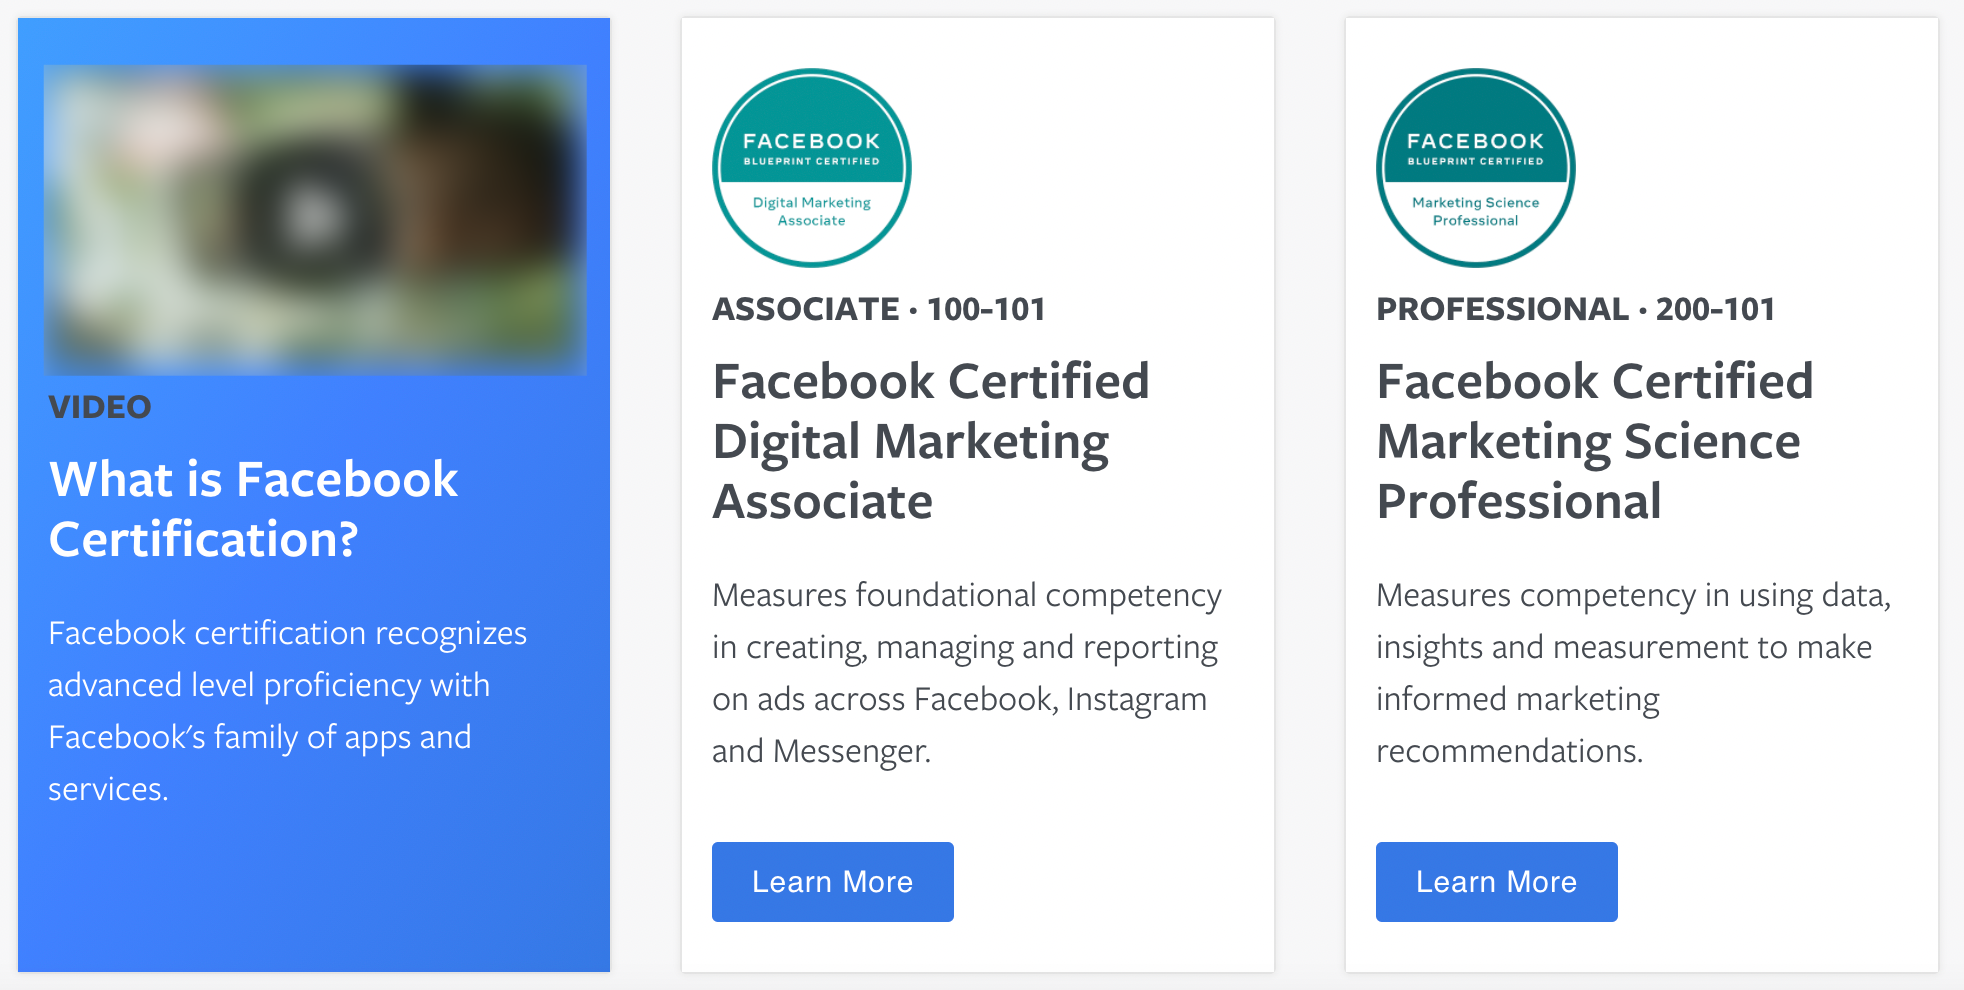 2023] 1000+ Free Digital Marketing Certificates & Badges — Class Central